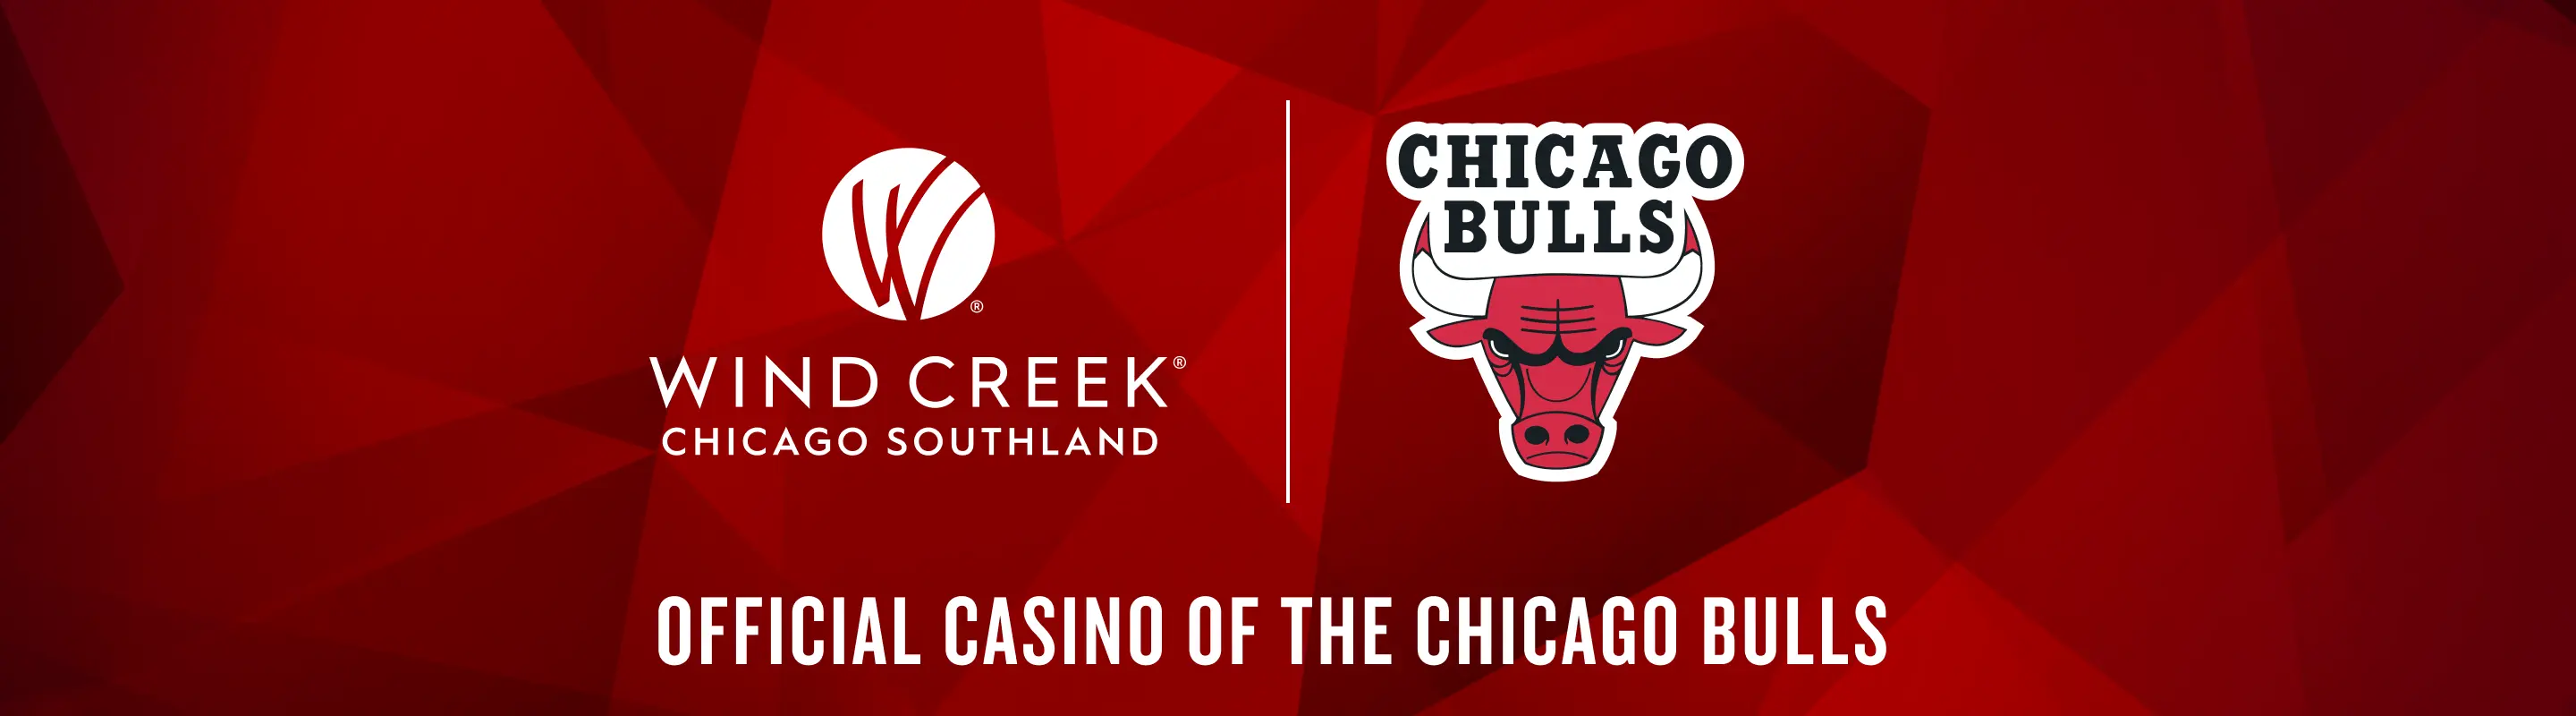 Windbreak Chicago Southland and Chicago Bulls logo: Official Casino of the Chicago Bulls